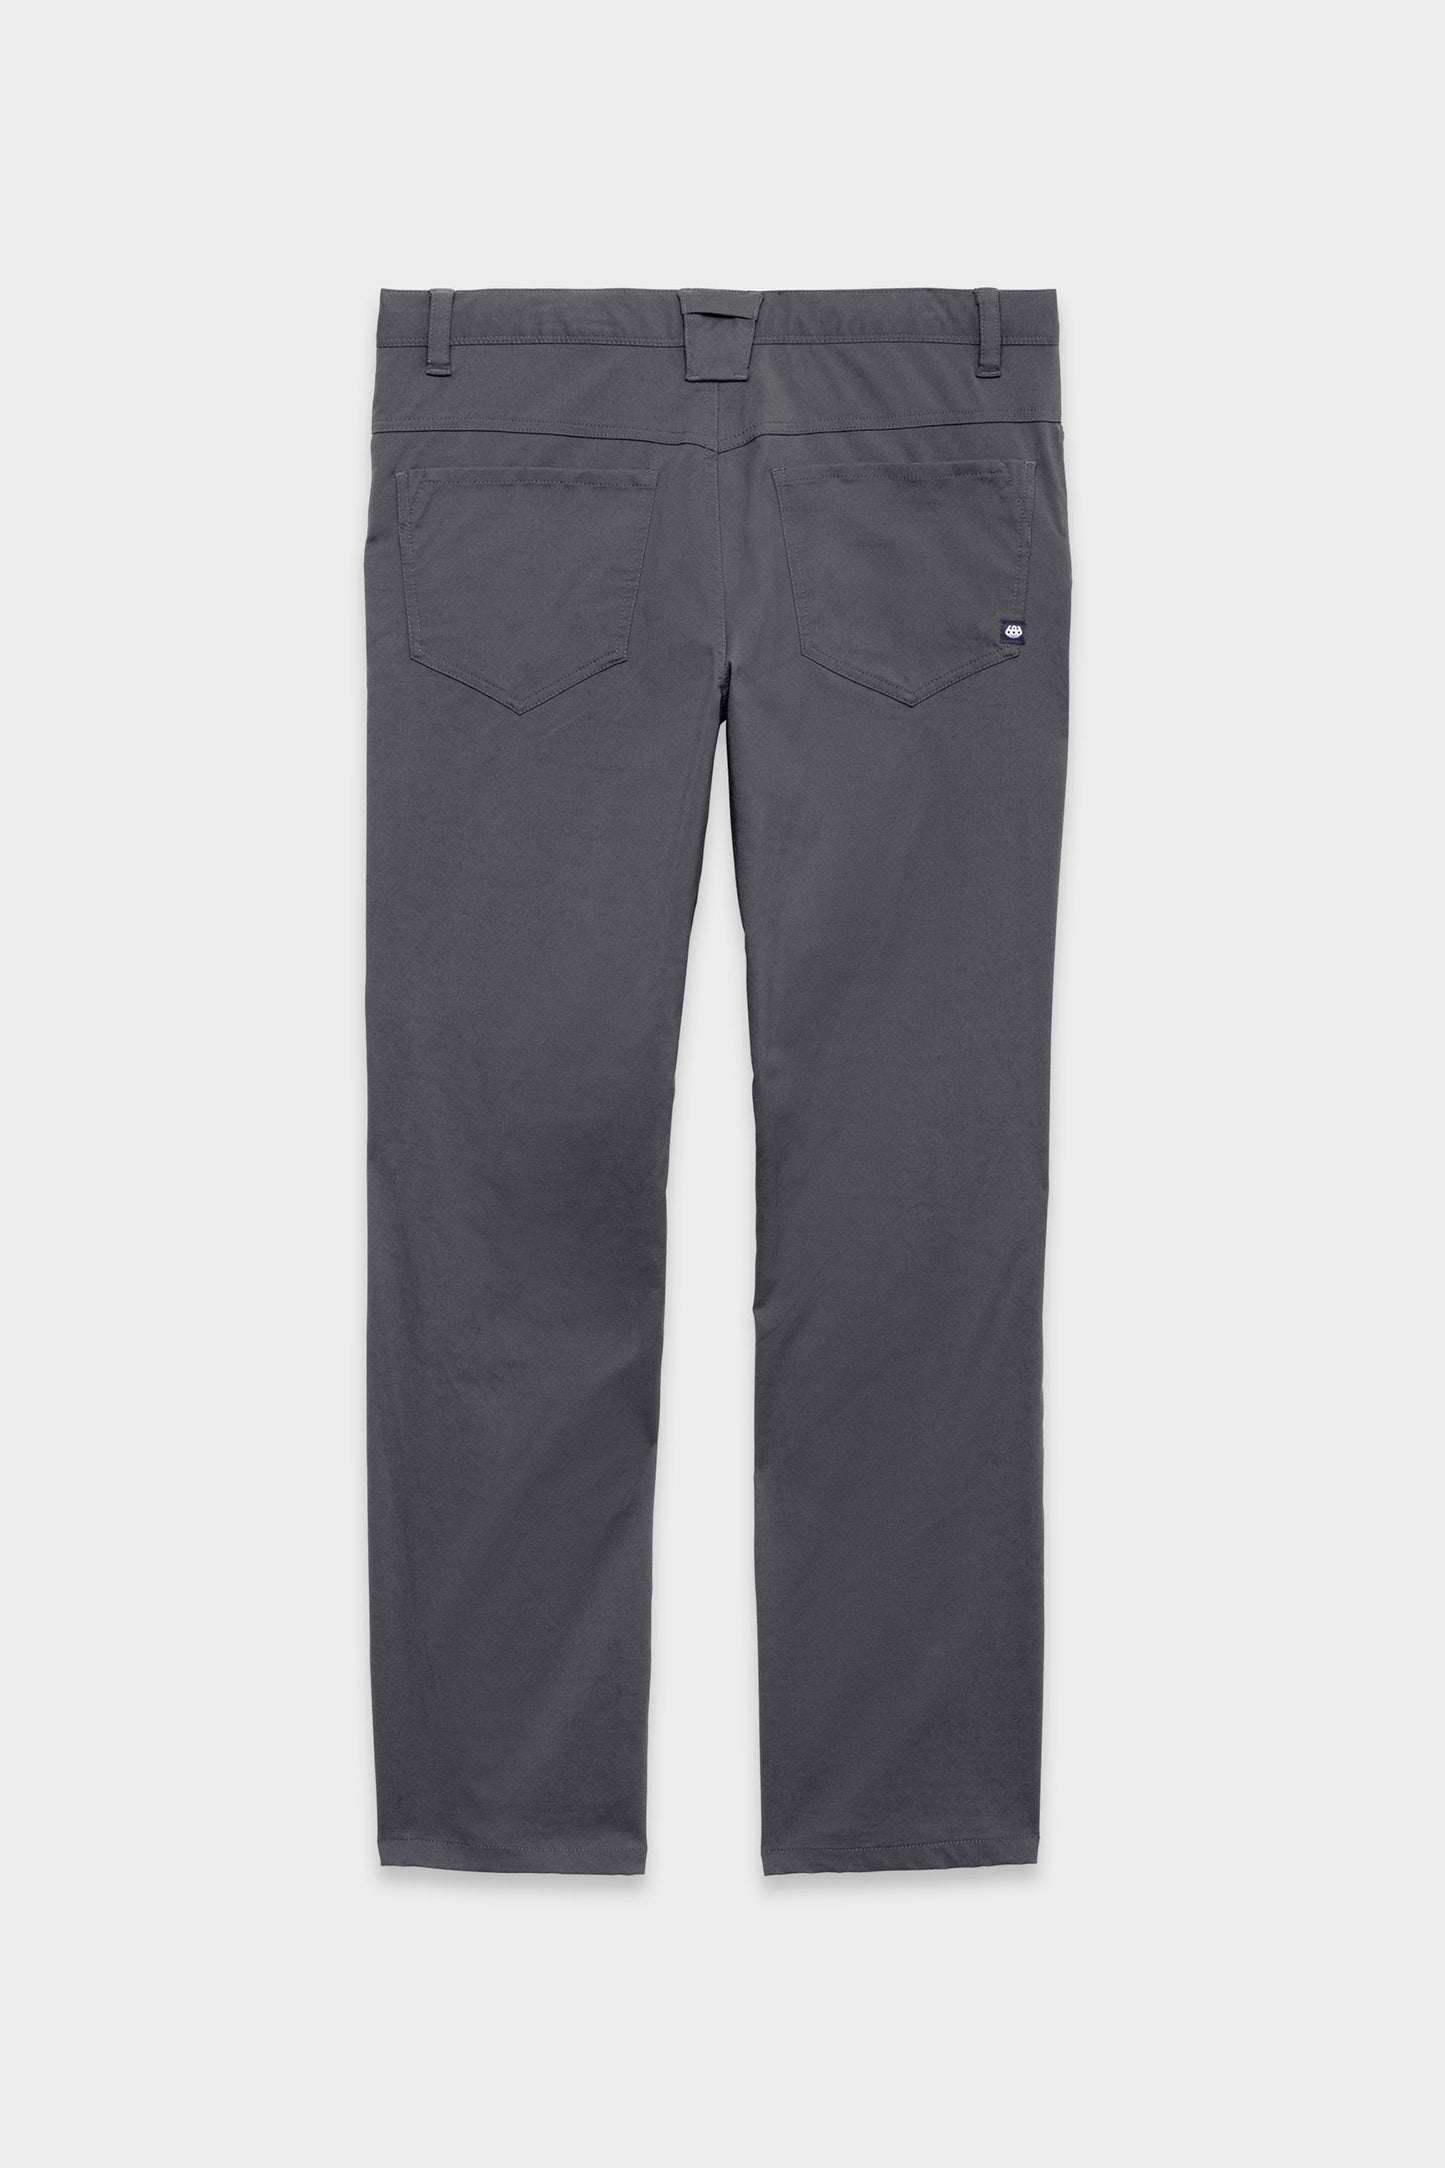 686 Men's Everywhere Relax Fit Pant